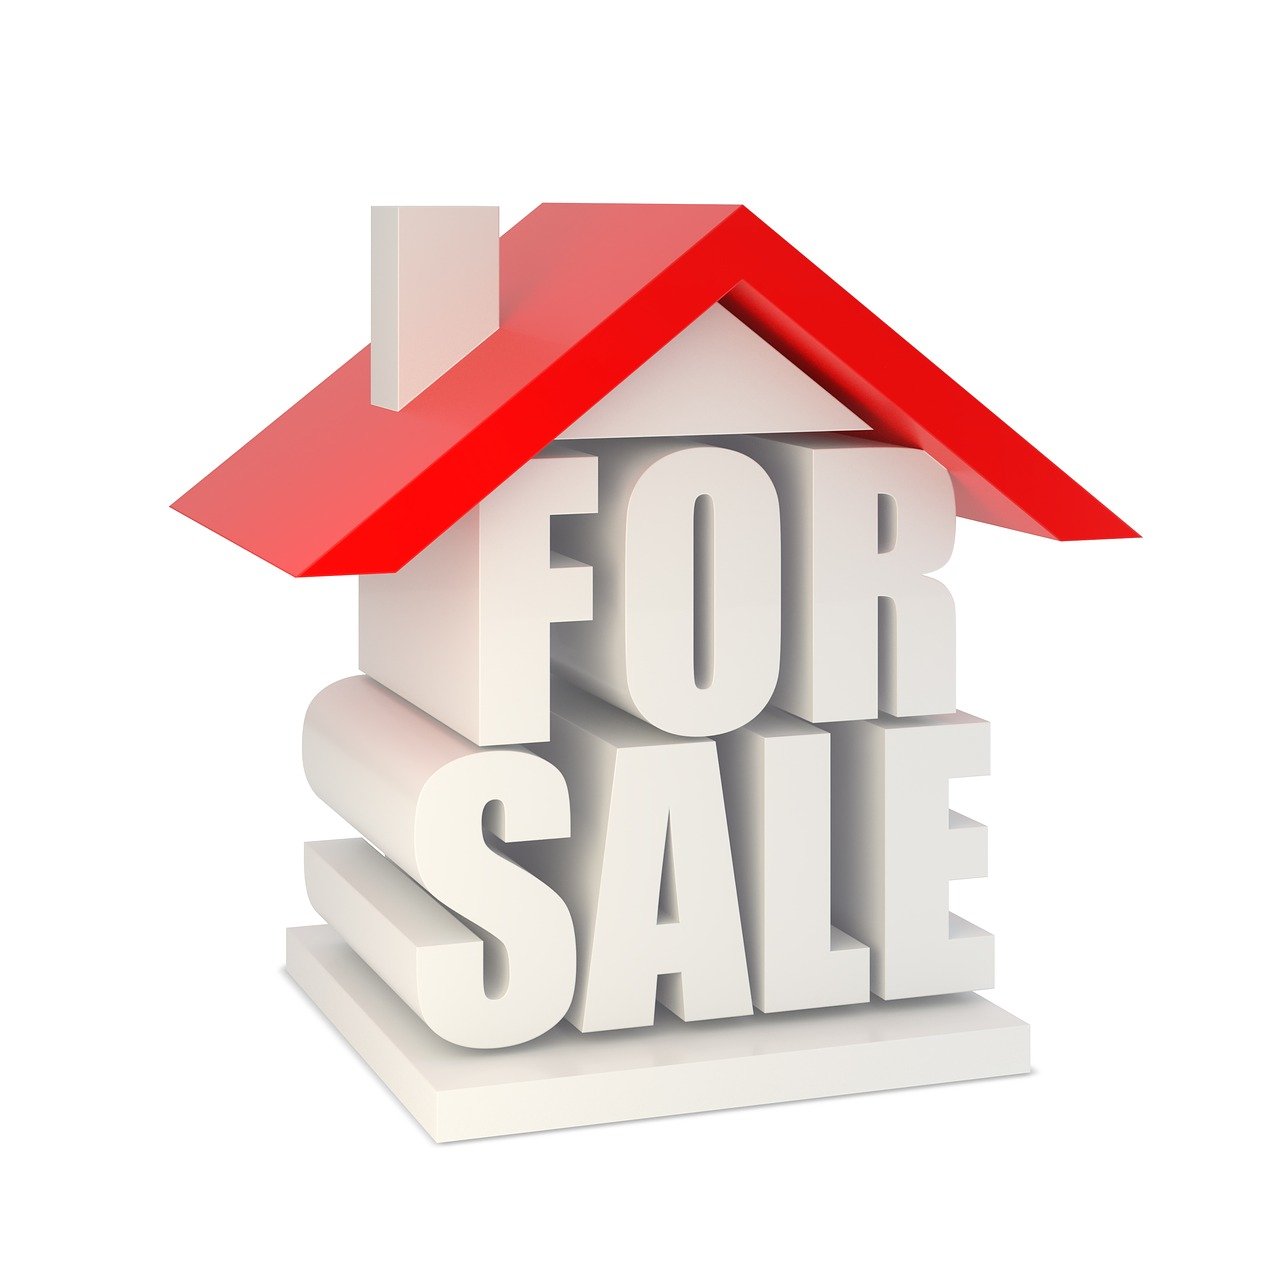 a house with a for sale sign in front of it, by senior artist, shutterstock, folk art, 3 d cg, advertisement photo, facing right, white